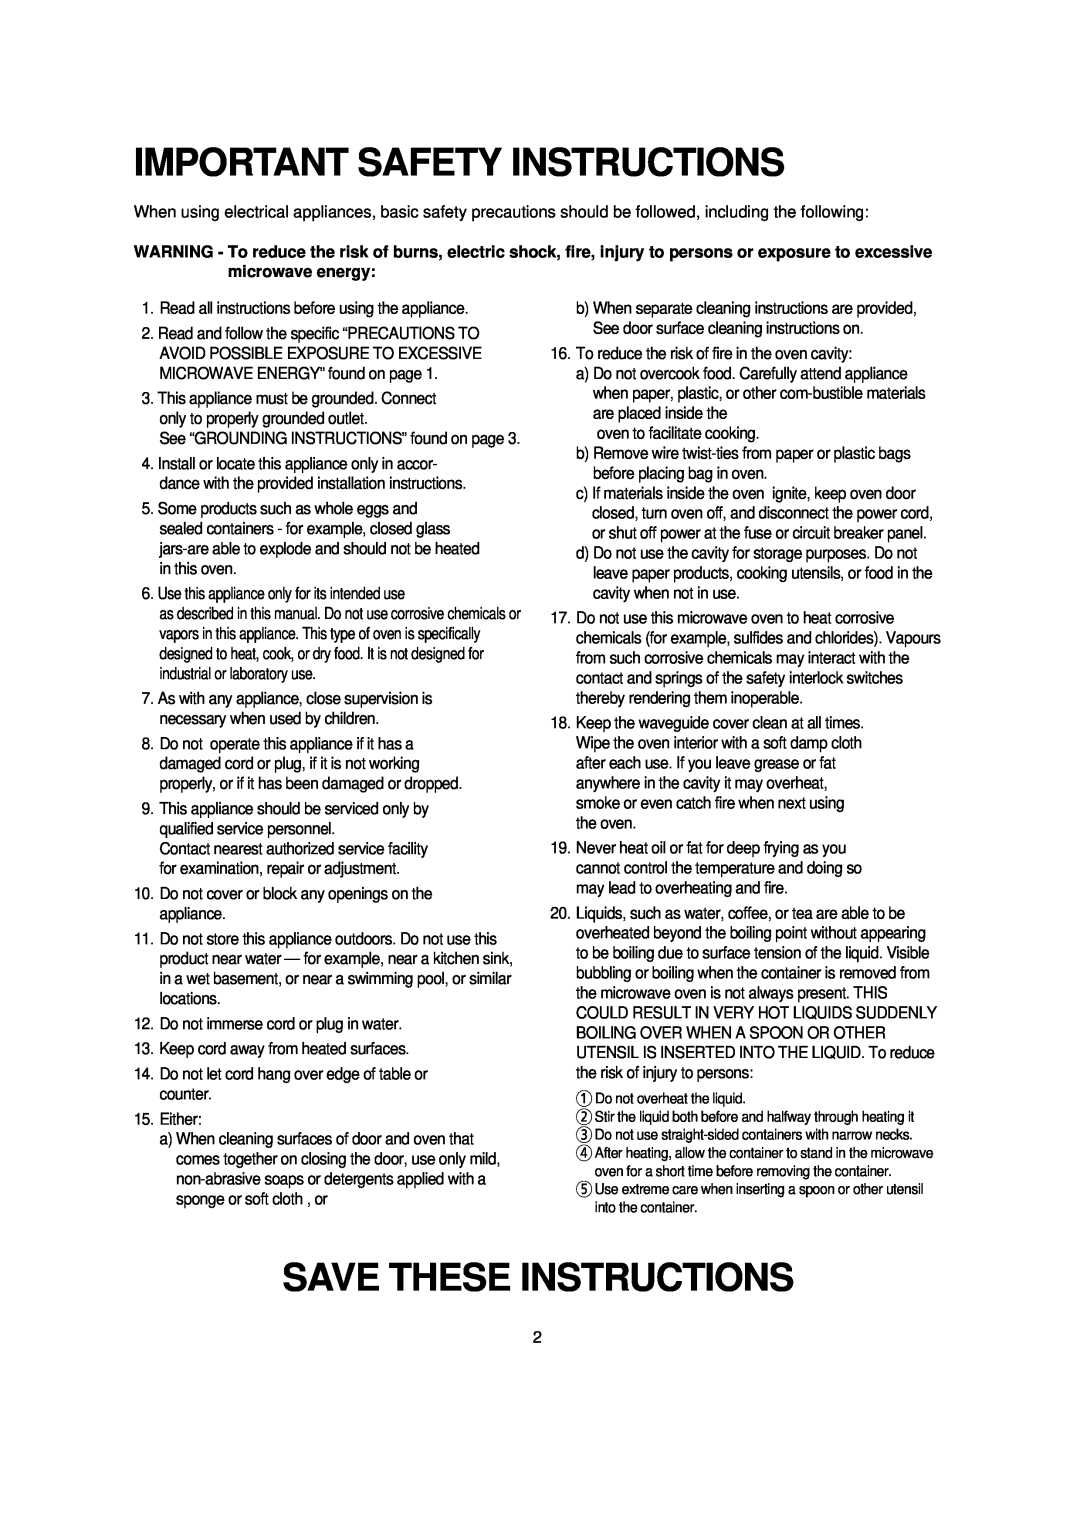 Turbo Air TMW-1100E manual Important Safety Instructions, Save These Instructions 